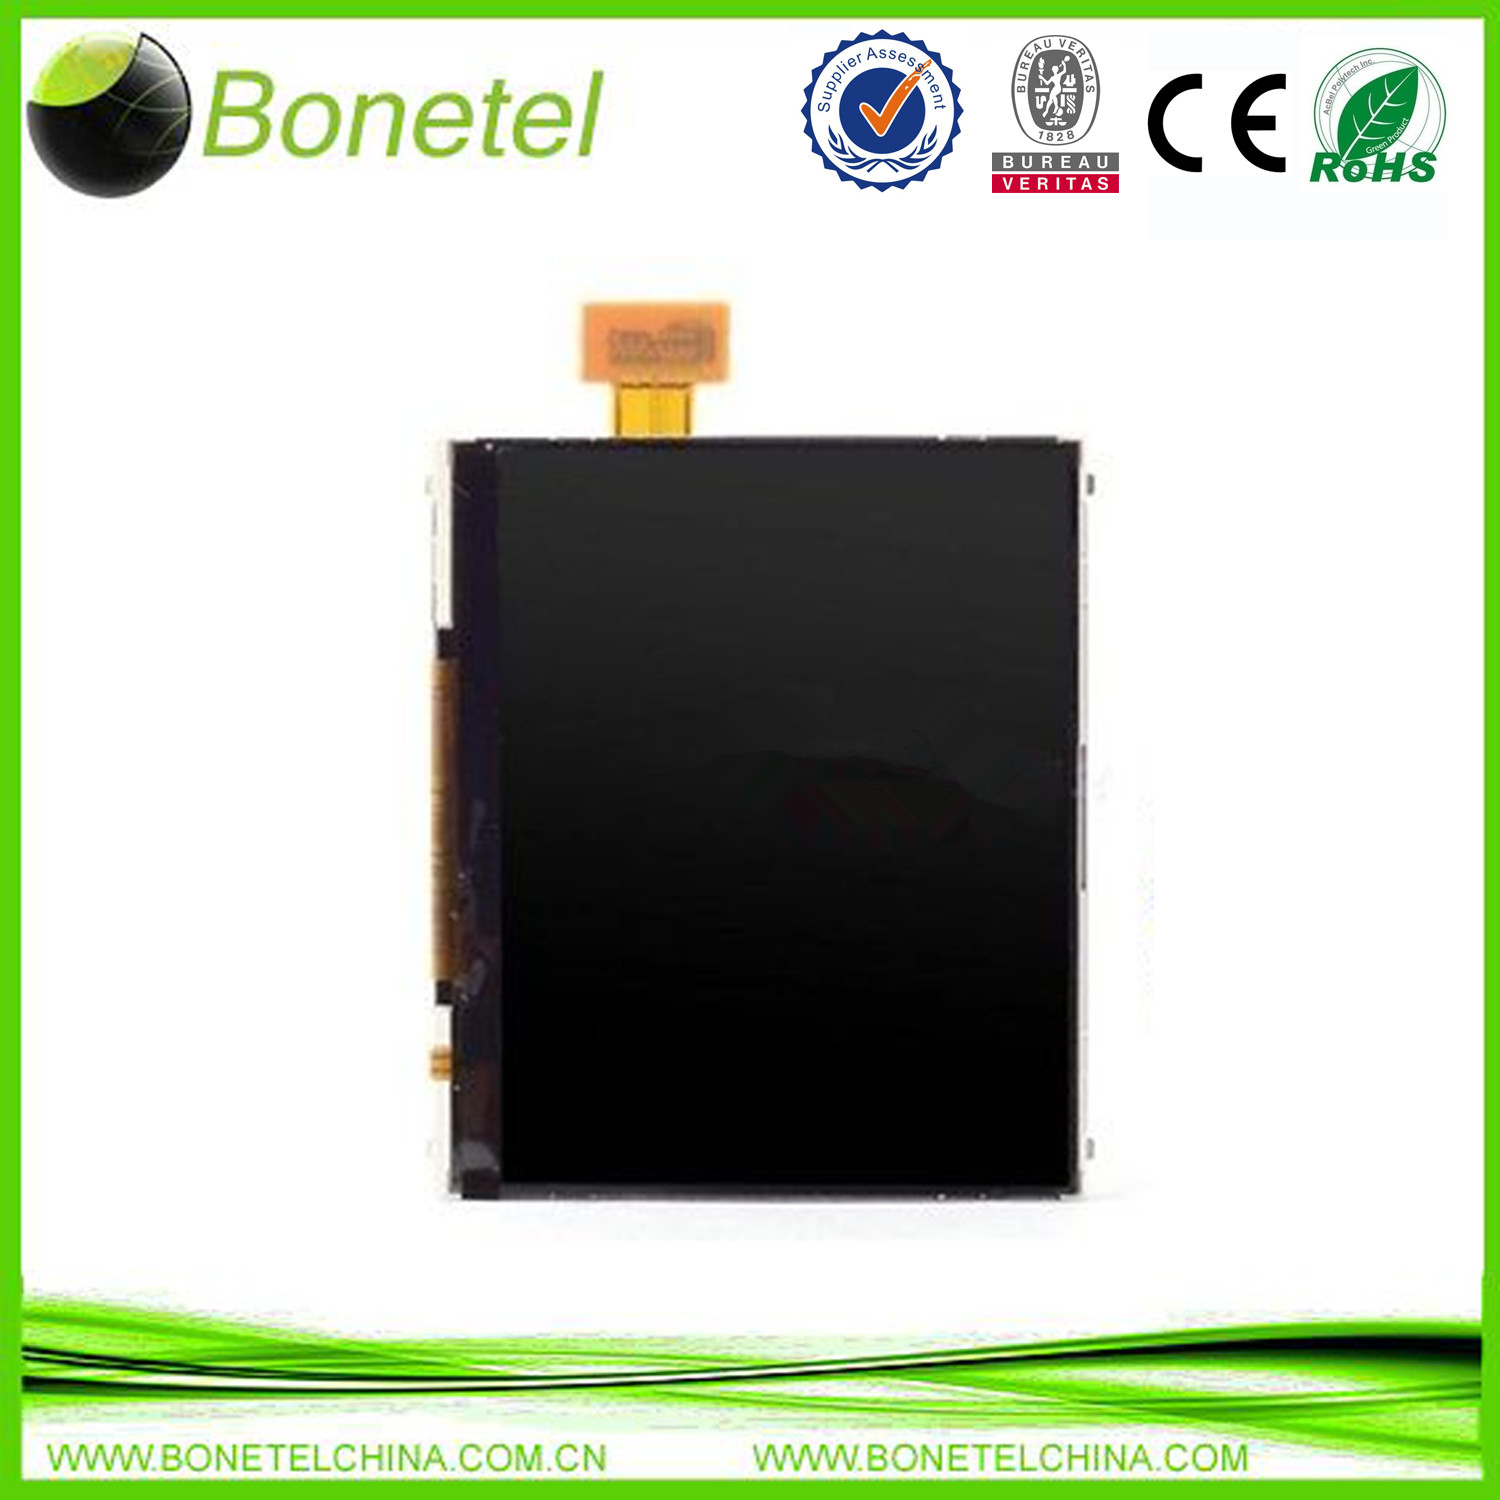 LCD Display Screen Replace For Samsung S3350 Chat335